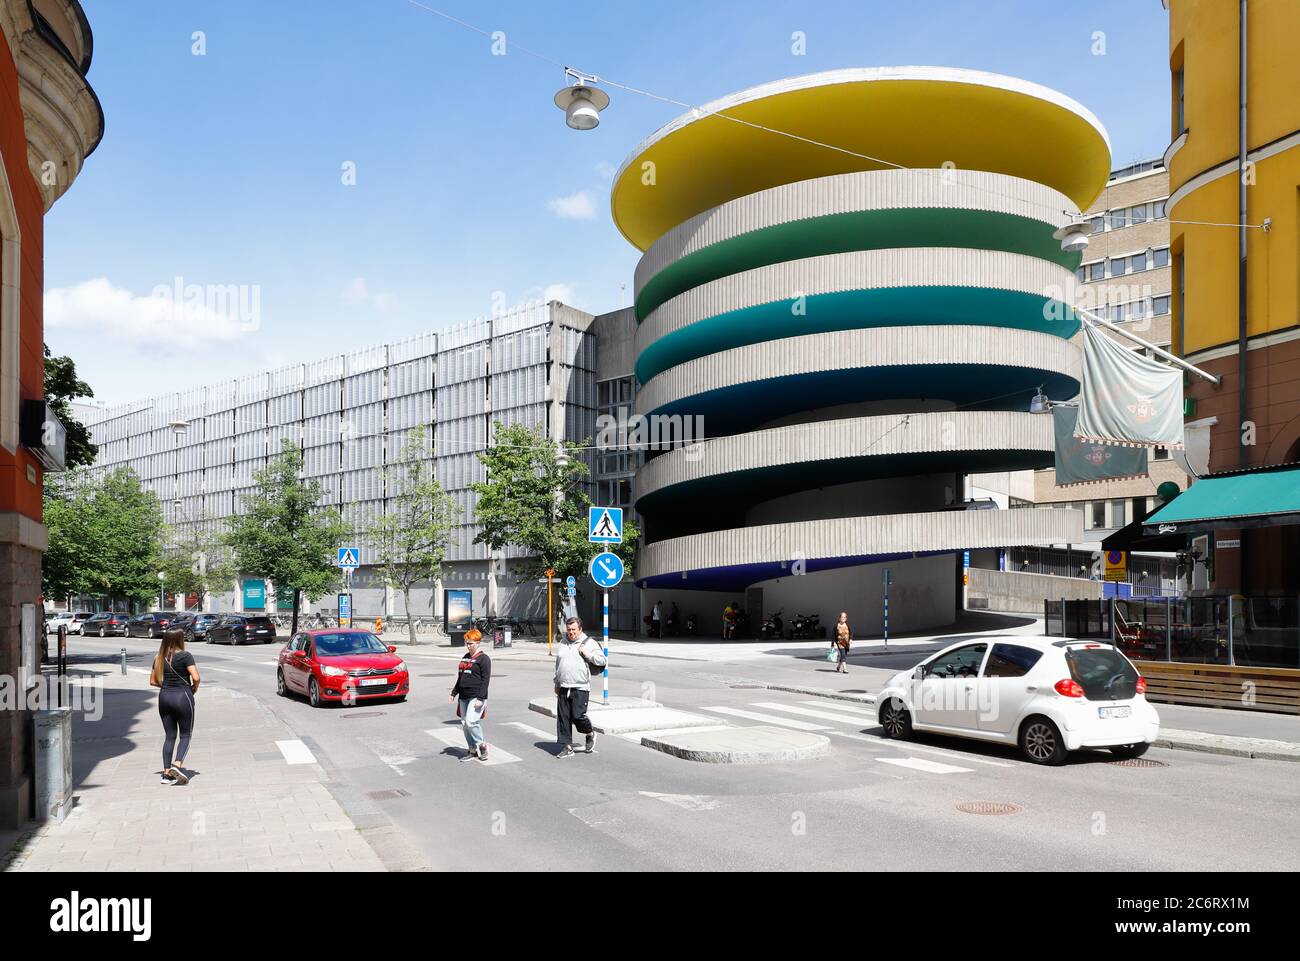 Norrkoping, Sweden - July 3, 2020: Outside view of the multistory car park Sprialen located in the city center. Stock Photo